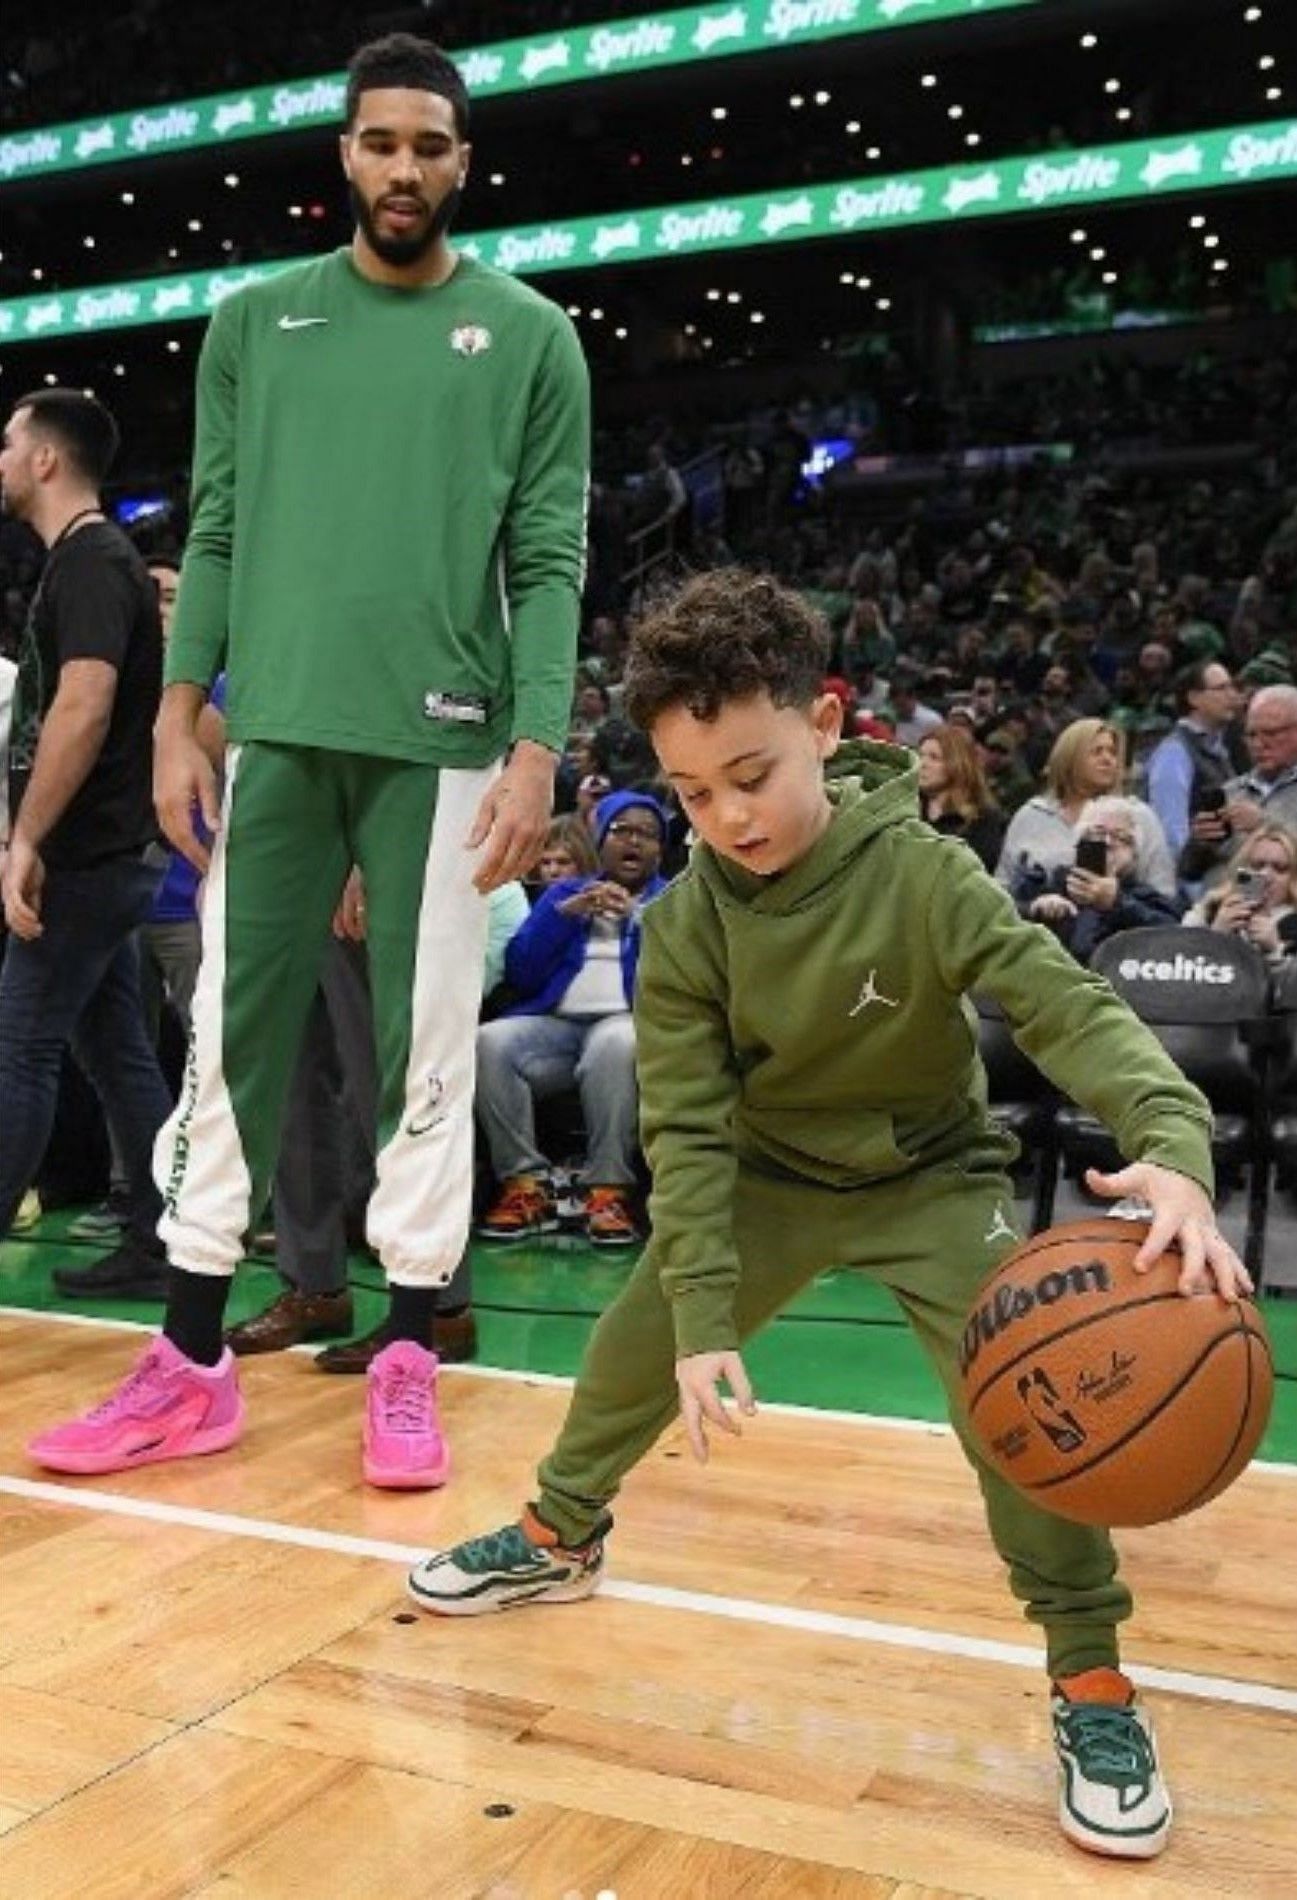 Jayson Tatum share a moment with his son Deuce ahead of Boston's game against Philadelphia on Friday.